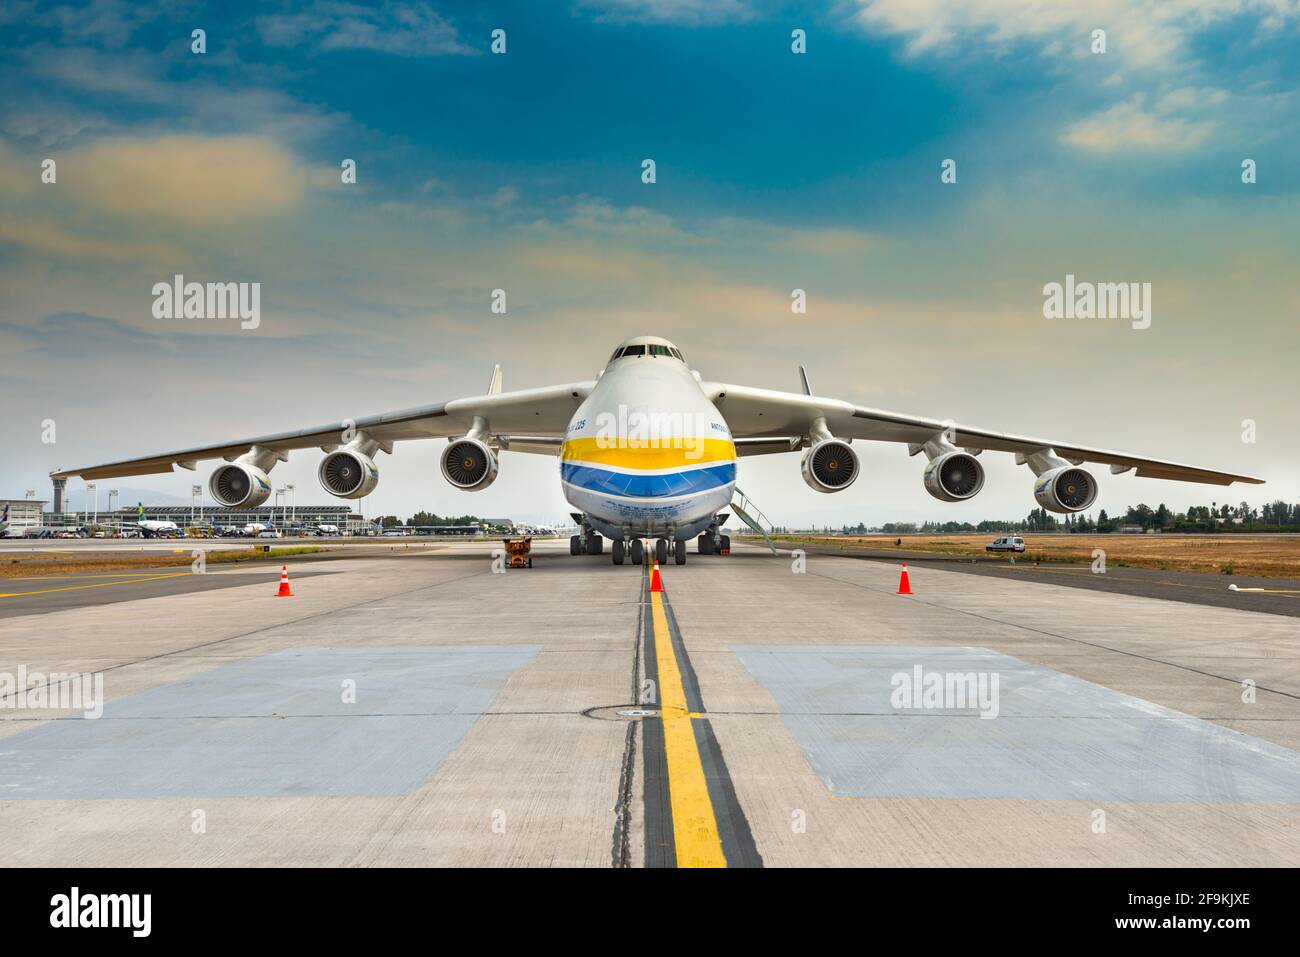 Santiago de Chile, Metropolitan Region, Chile, South America - The Antonov 225 also know as AN-225 and the biggest airplane. Stock Photo